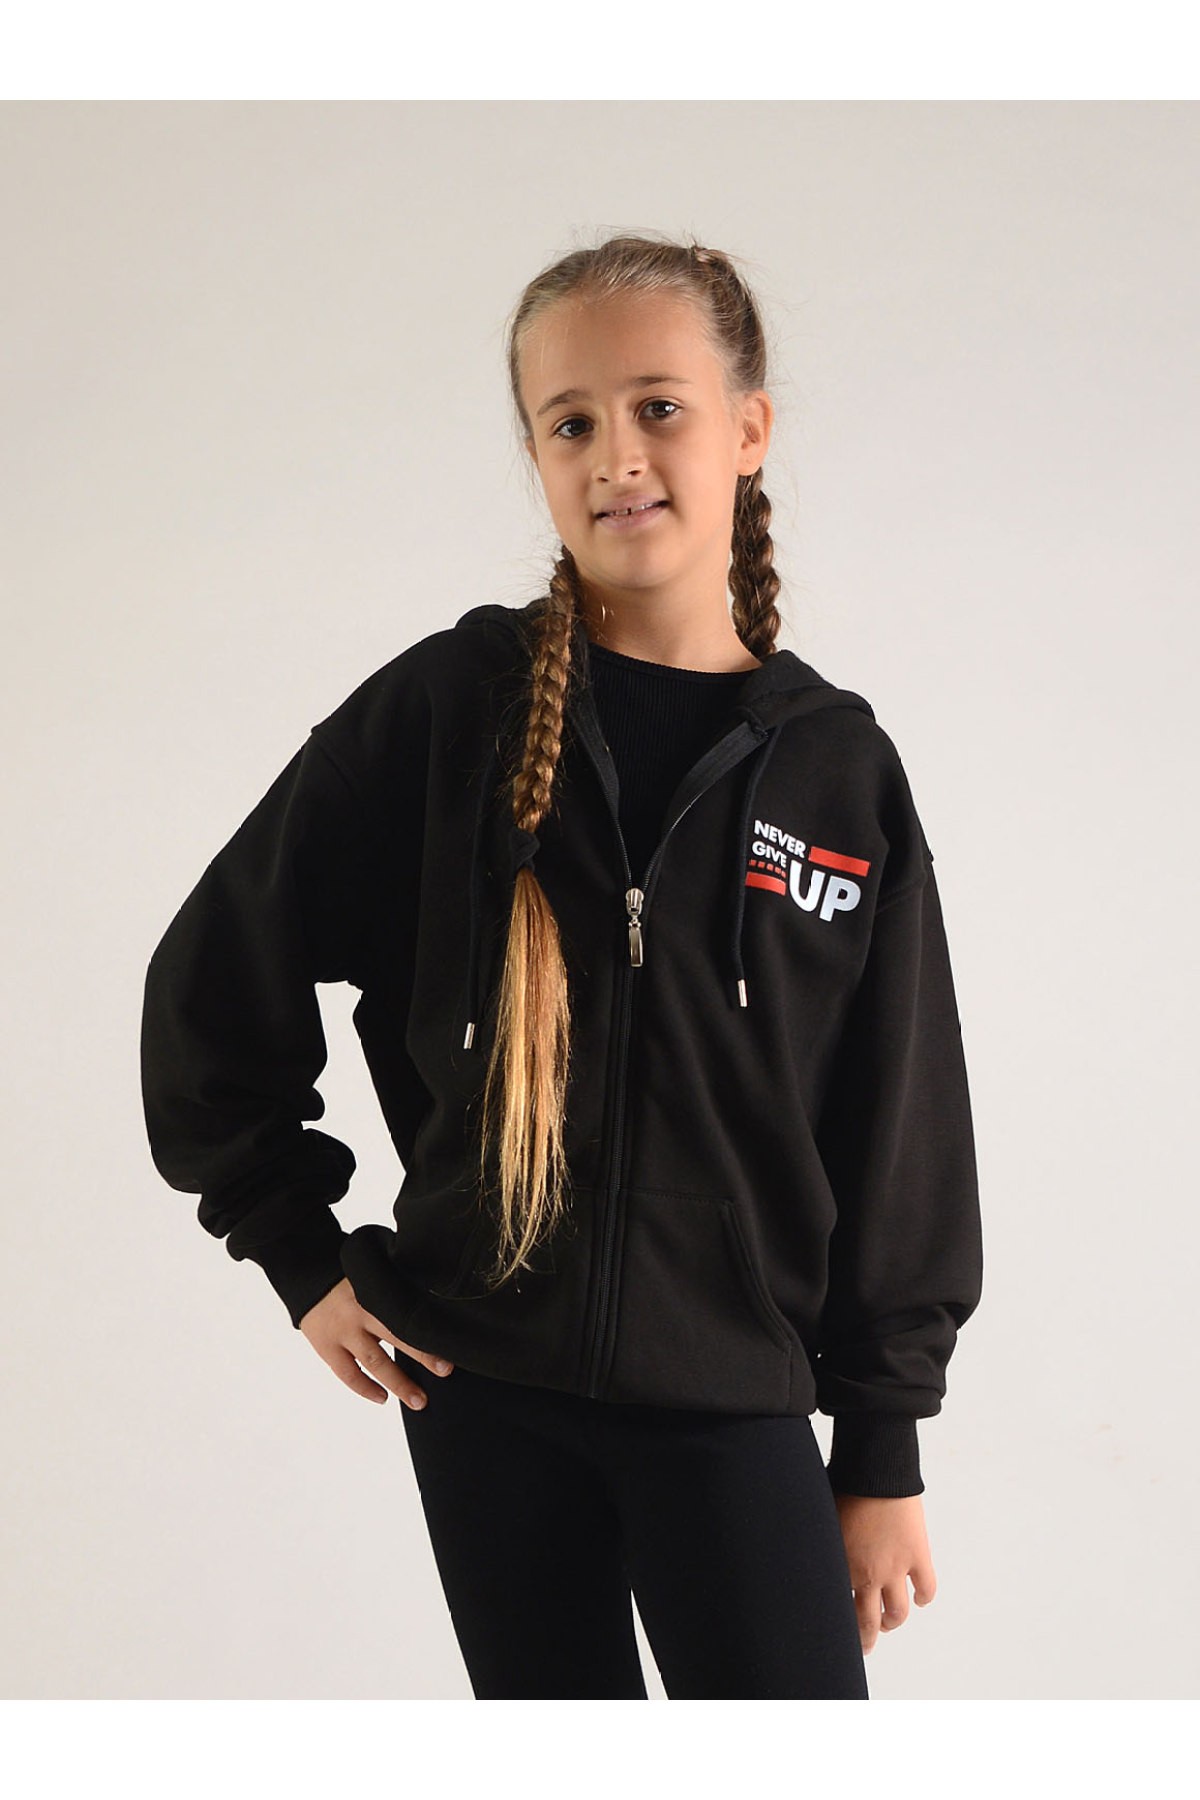 Kids Unisex Cotton Hoodie Never Give Up Printed Black SSUWZ4 